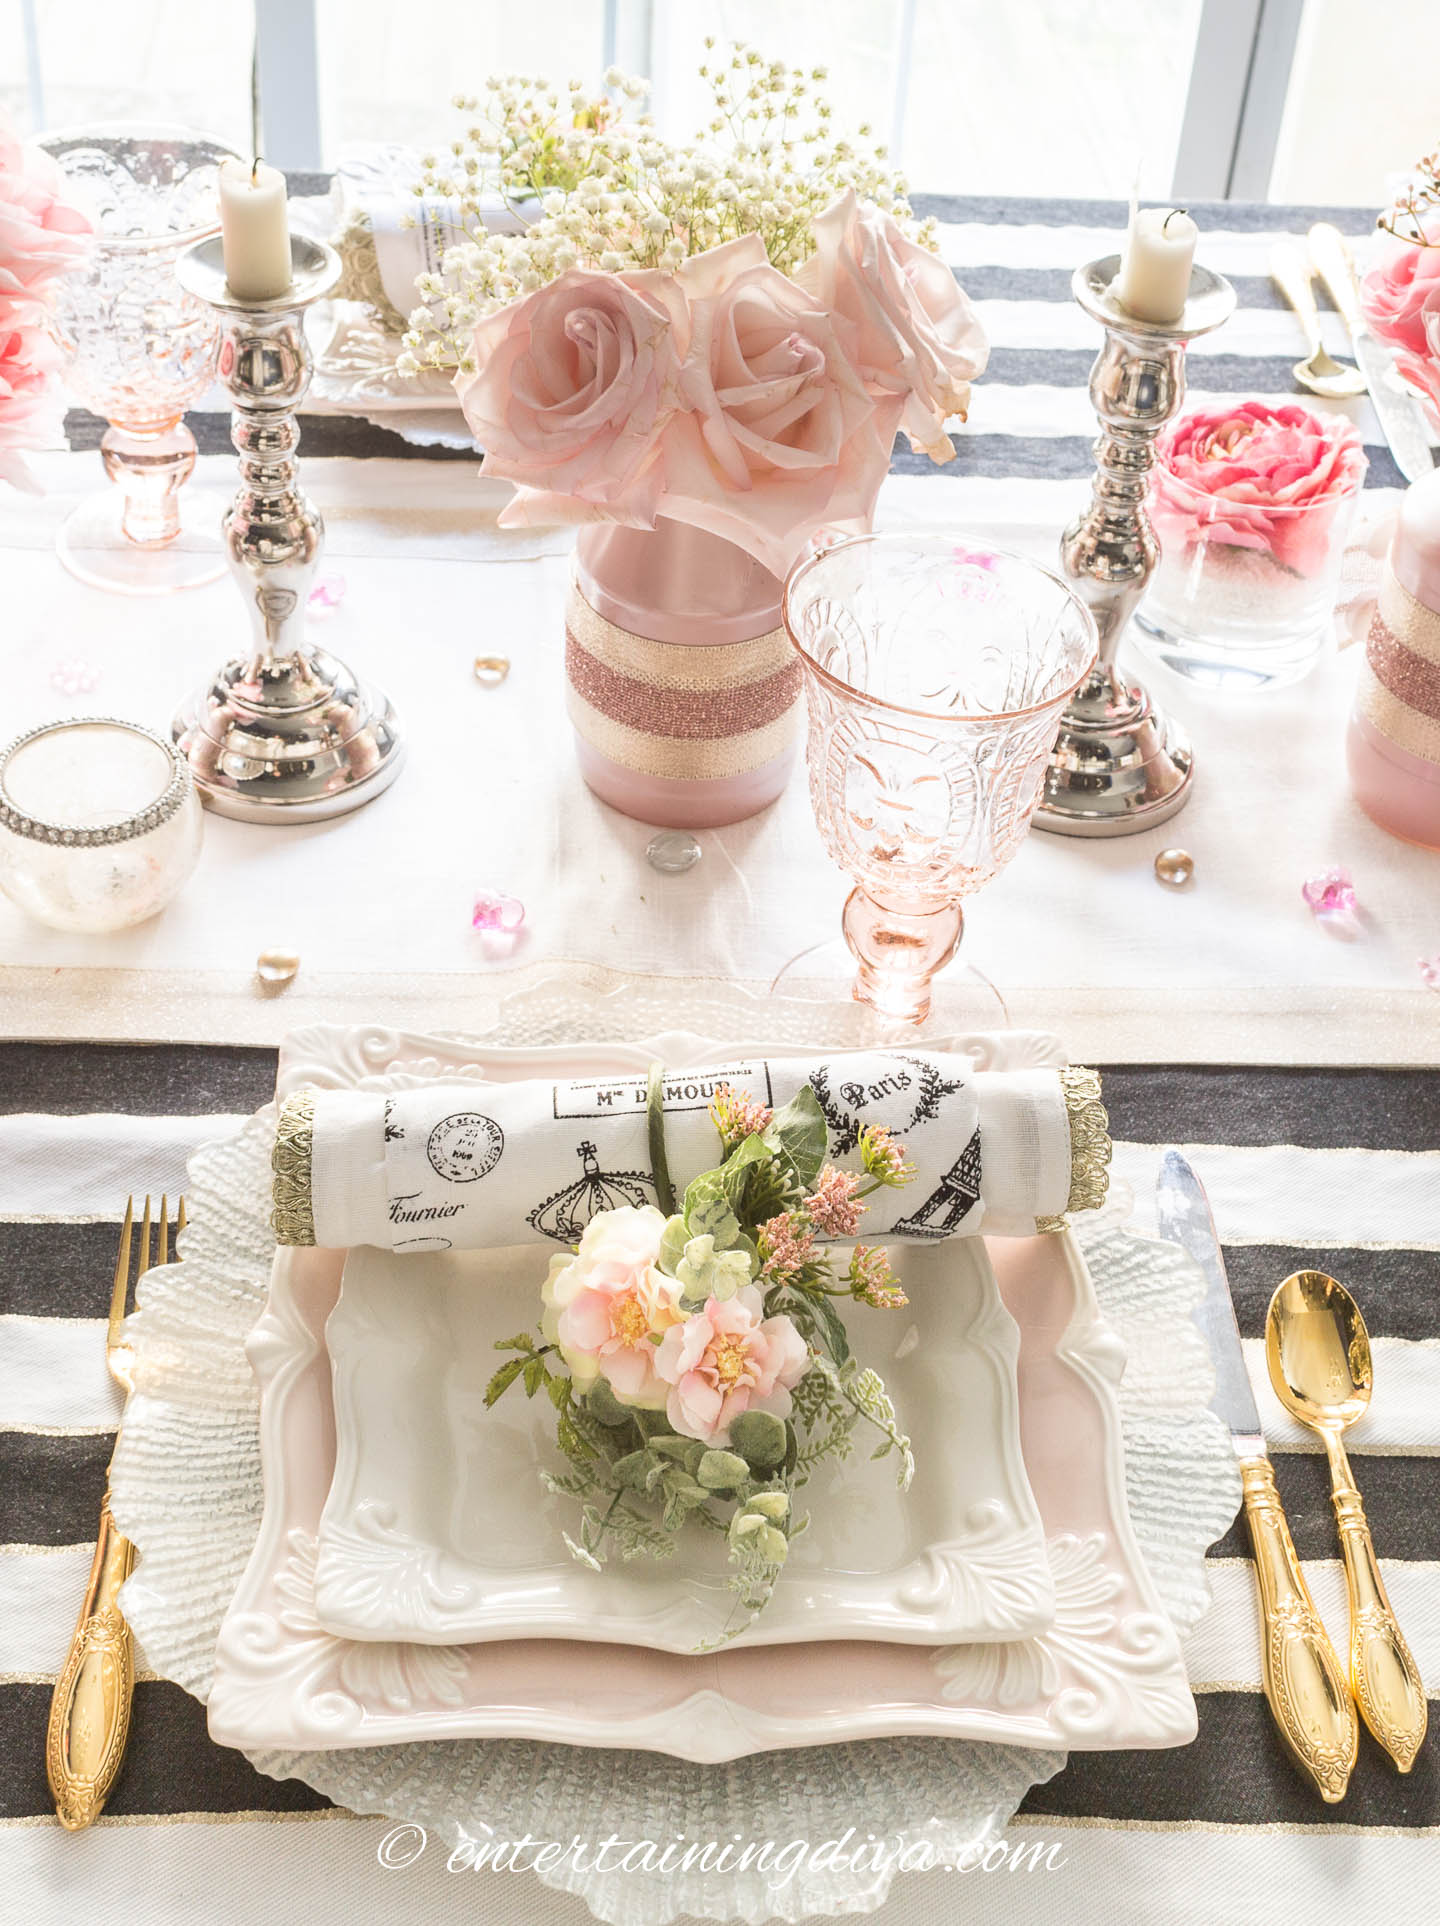 Galentine's Day blush pink place setting with roses